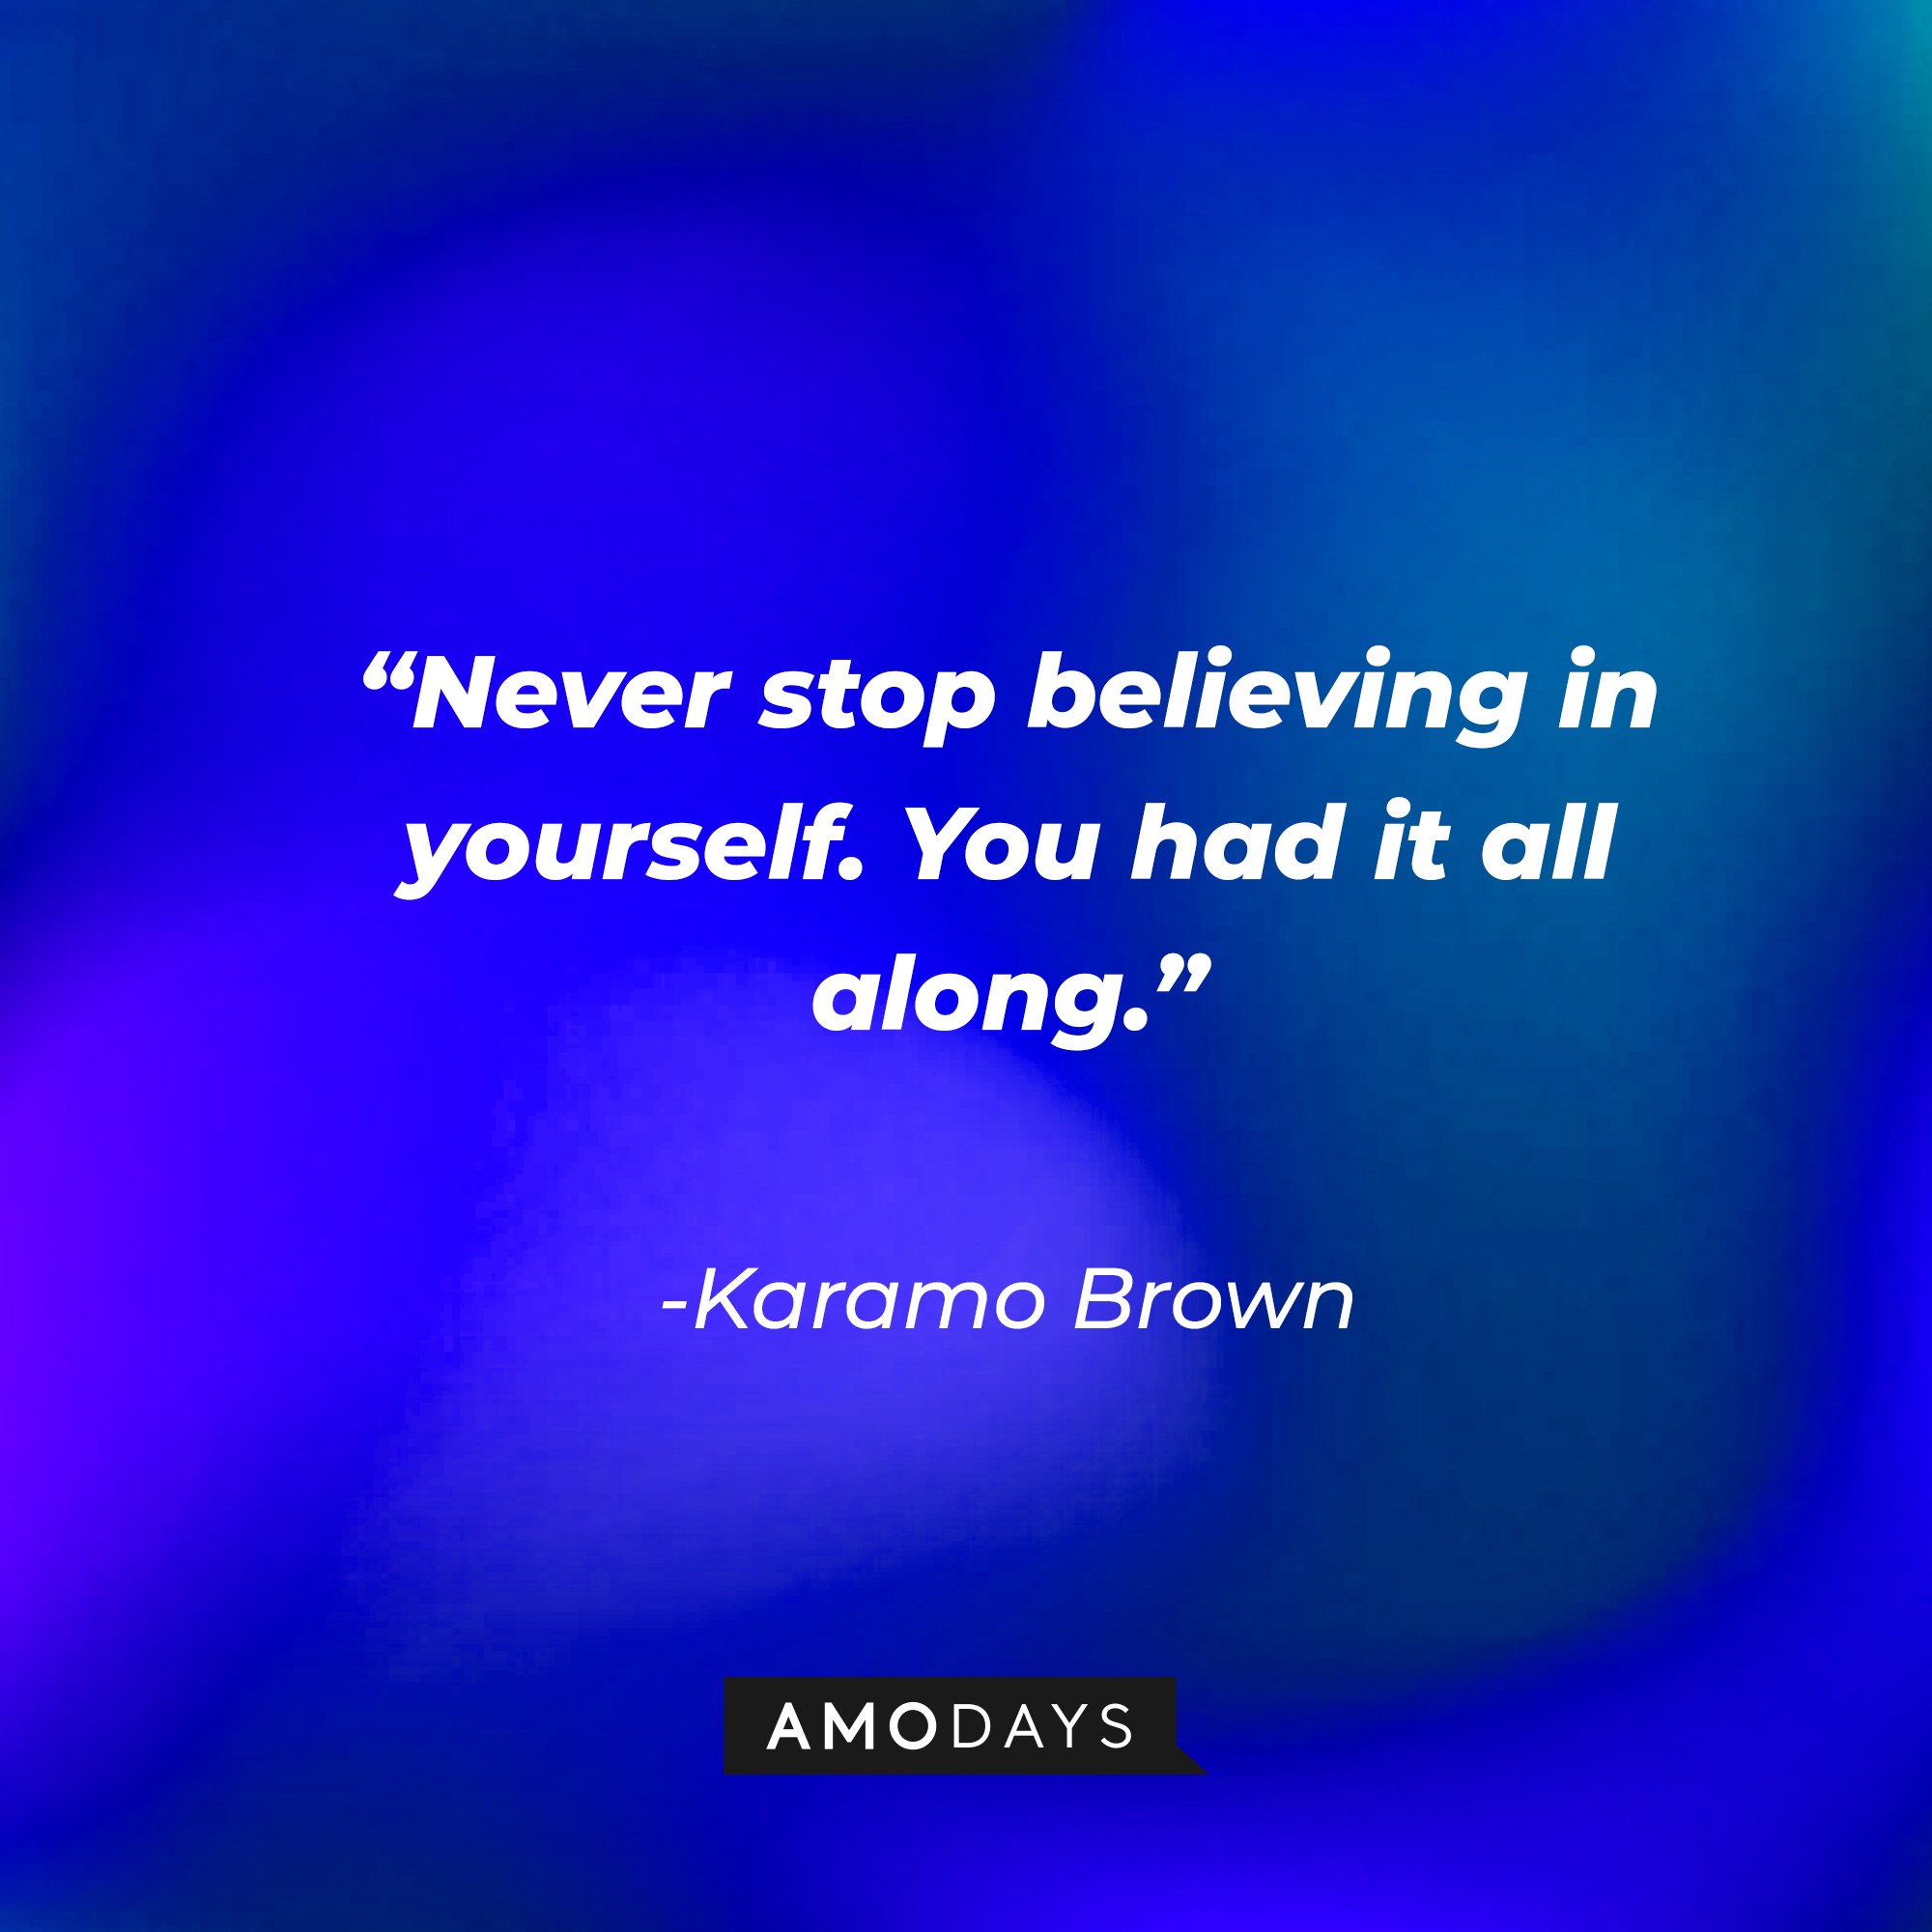 Karamo Brown's quote: "Never stop believing in yourself. You had it all along." | Source: Getty Images